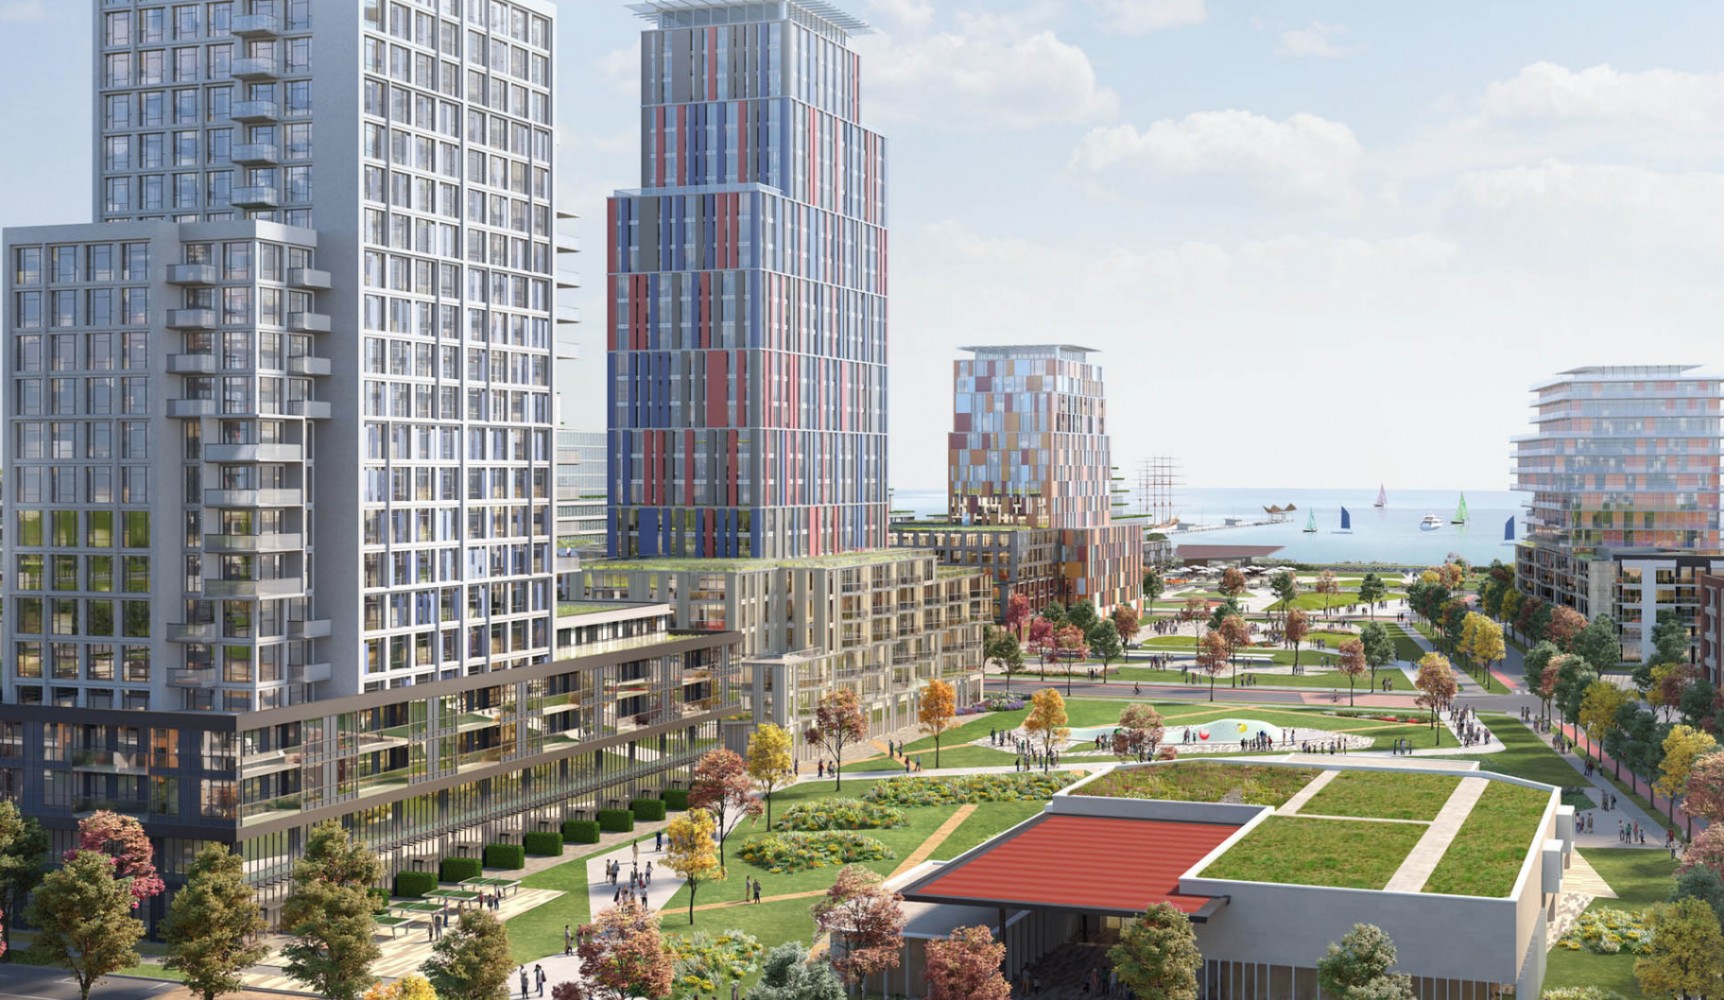 How a tug-of-war between developers and residents transformed plans for Mississauga's waterfront